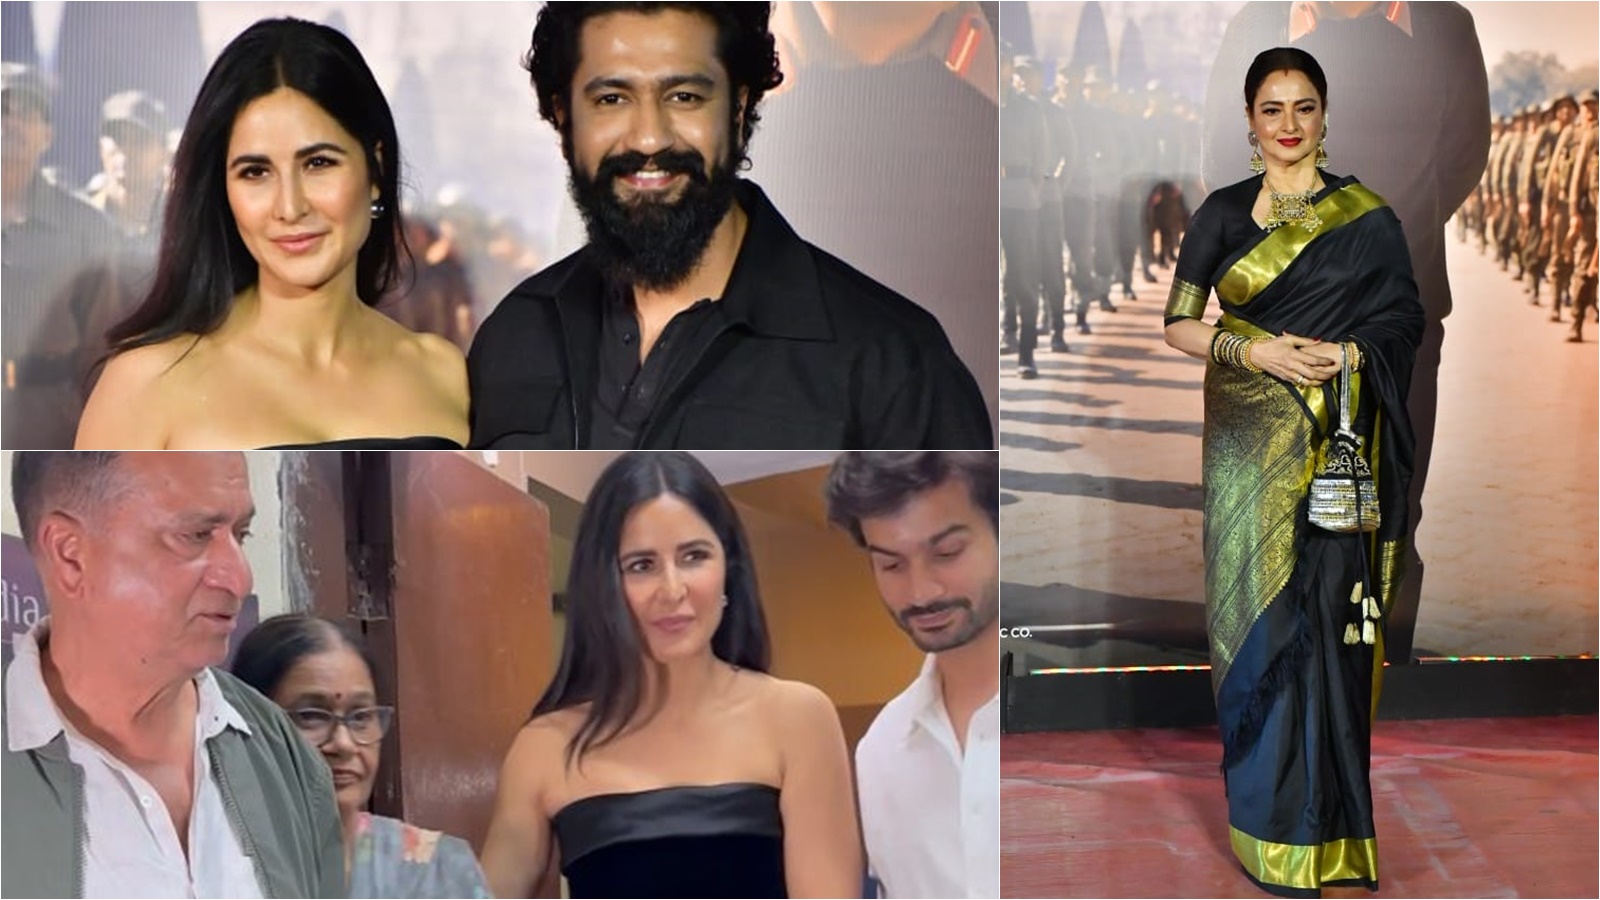 Katrina Kaif Hollywood Heroin Xxx Video - Doting daughter-in-law Katrina Kaif tends to Vicky Kaushal's parents, Rekha  salutes Sam Bahadur poster. See photos and videos from premiere event |  Bollywood News - The Indian Express